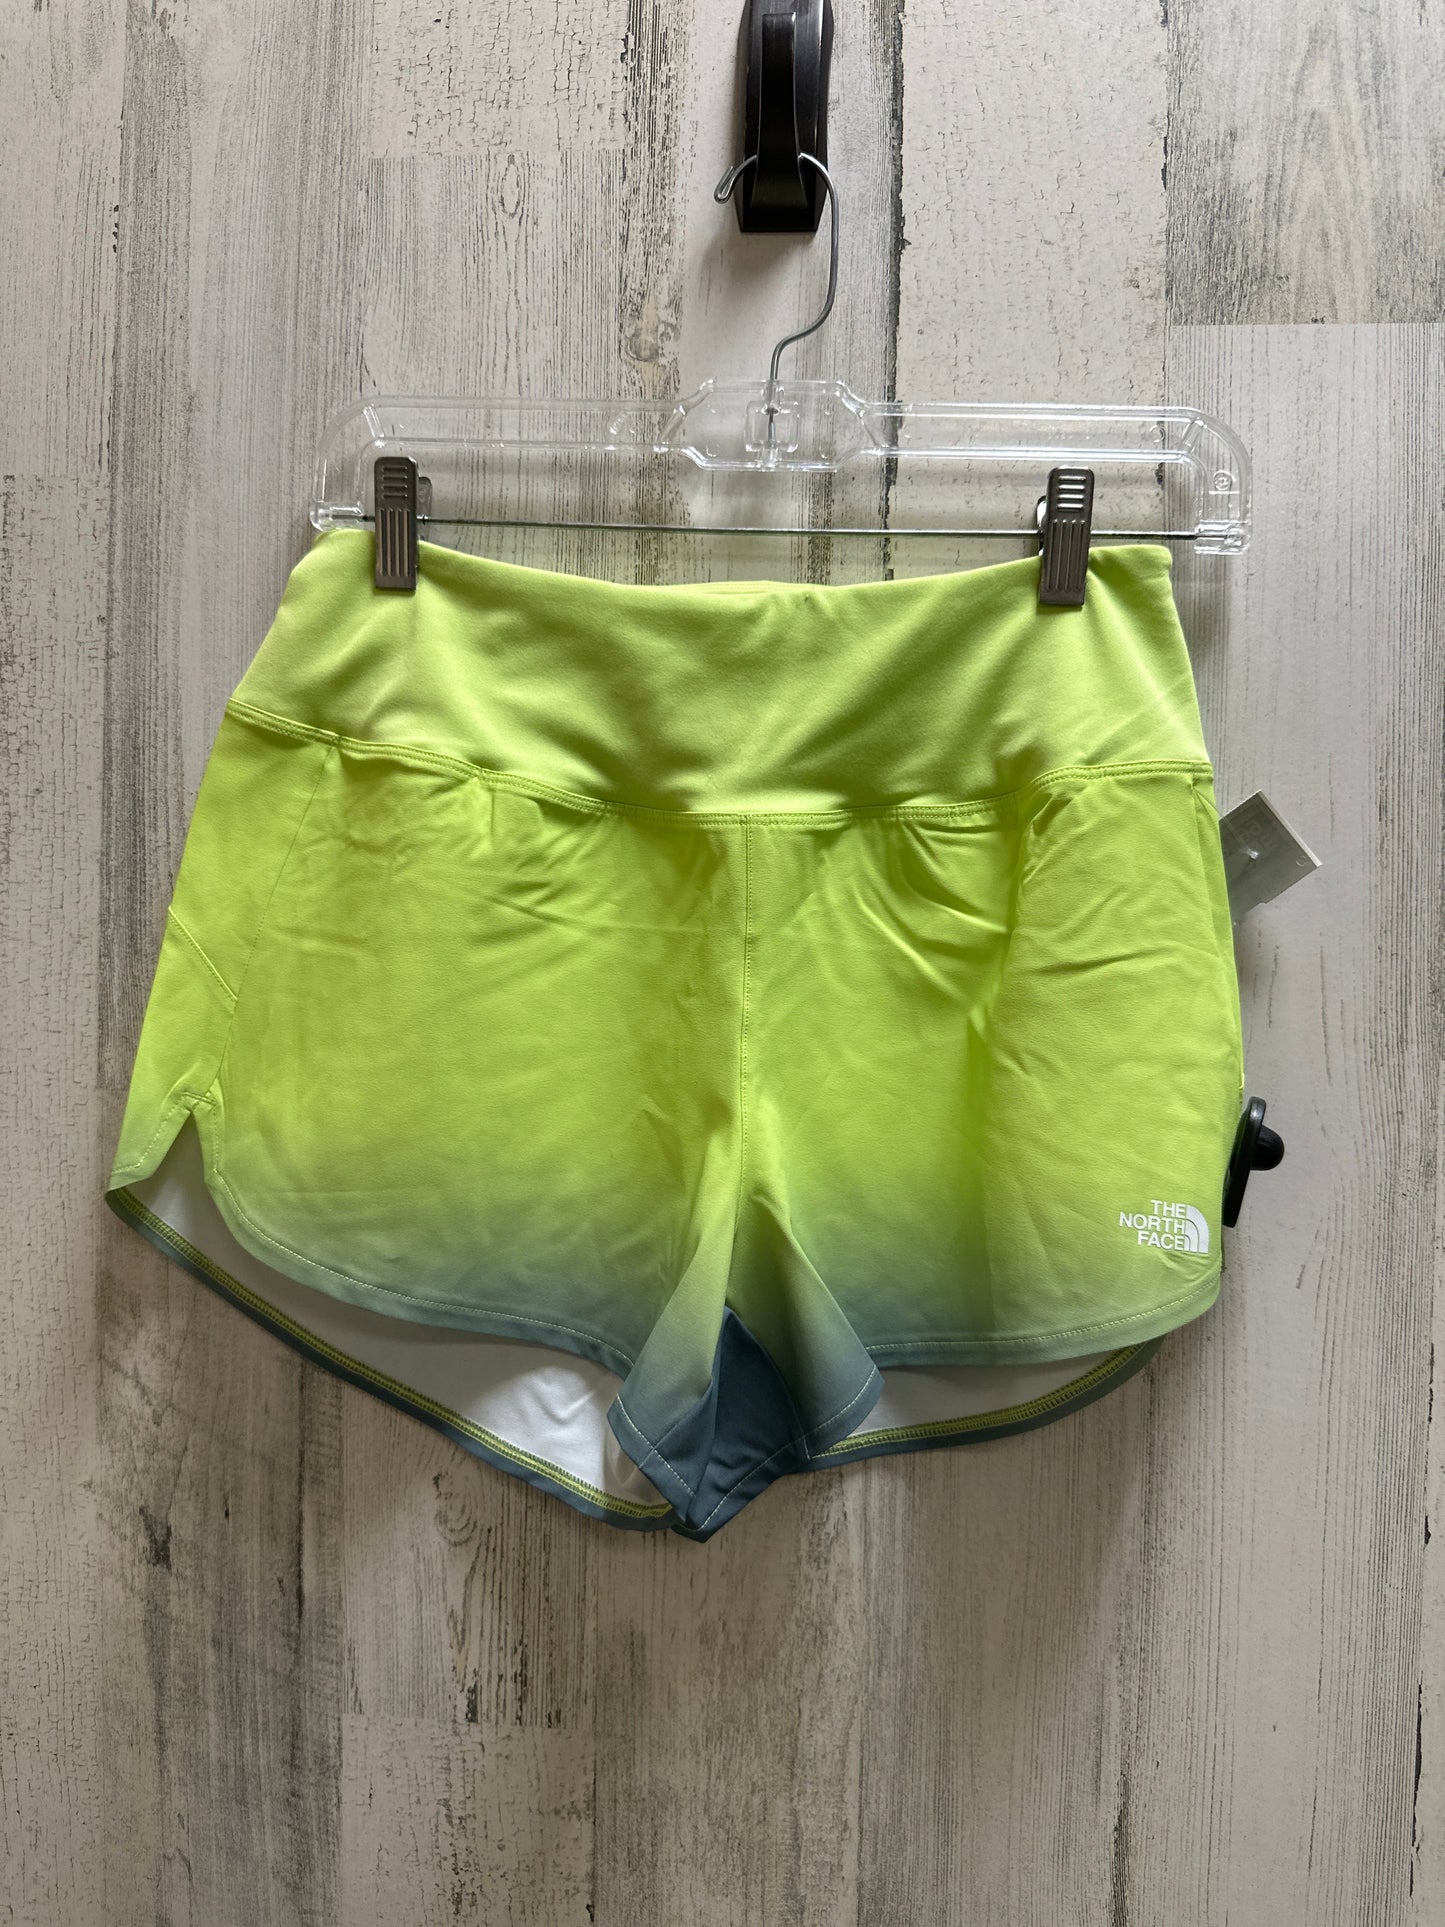 Green Athletic Shorts The North Face, Size S